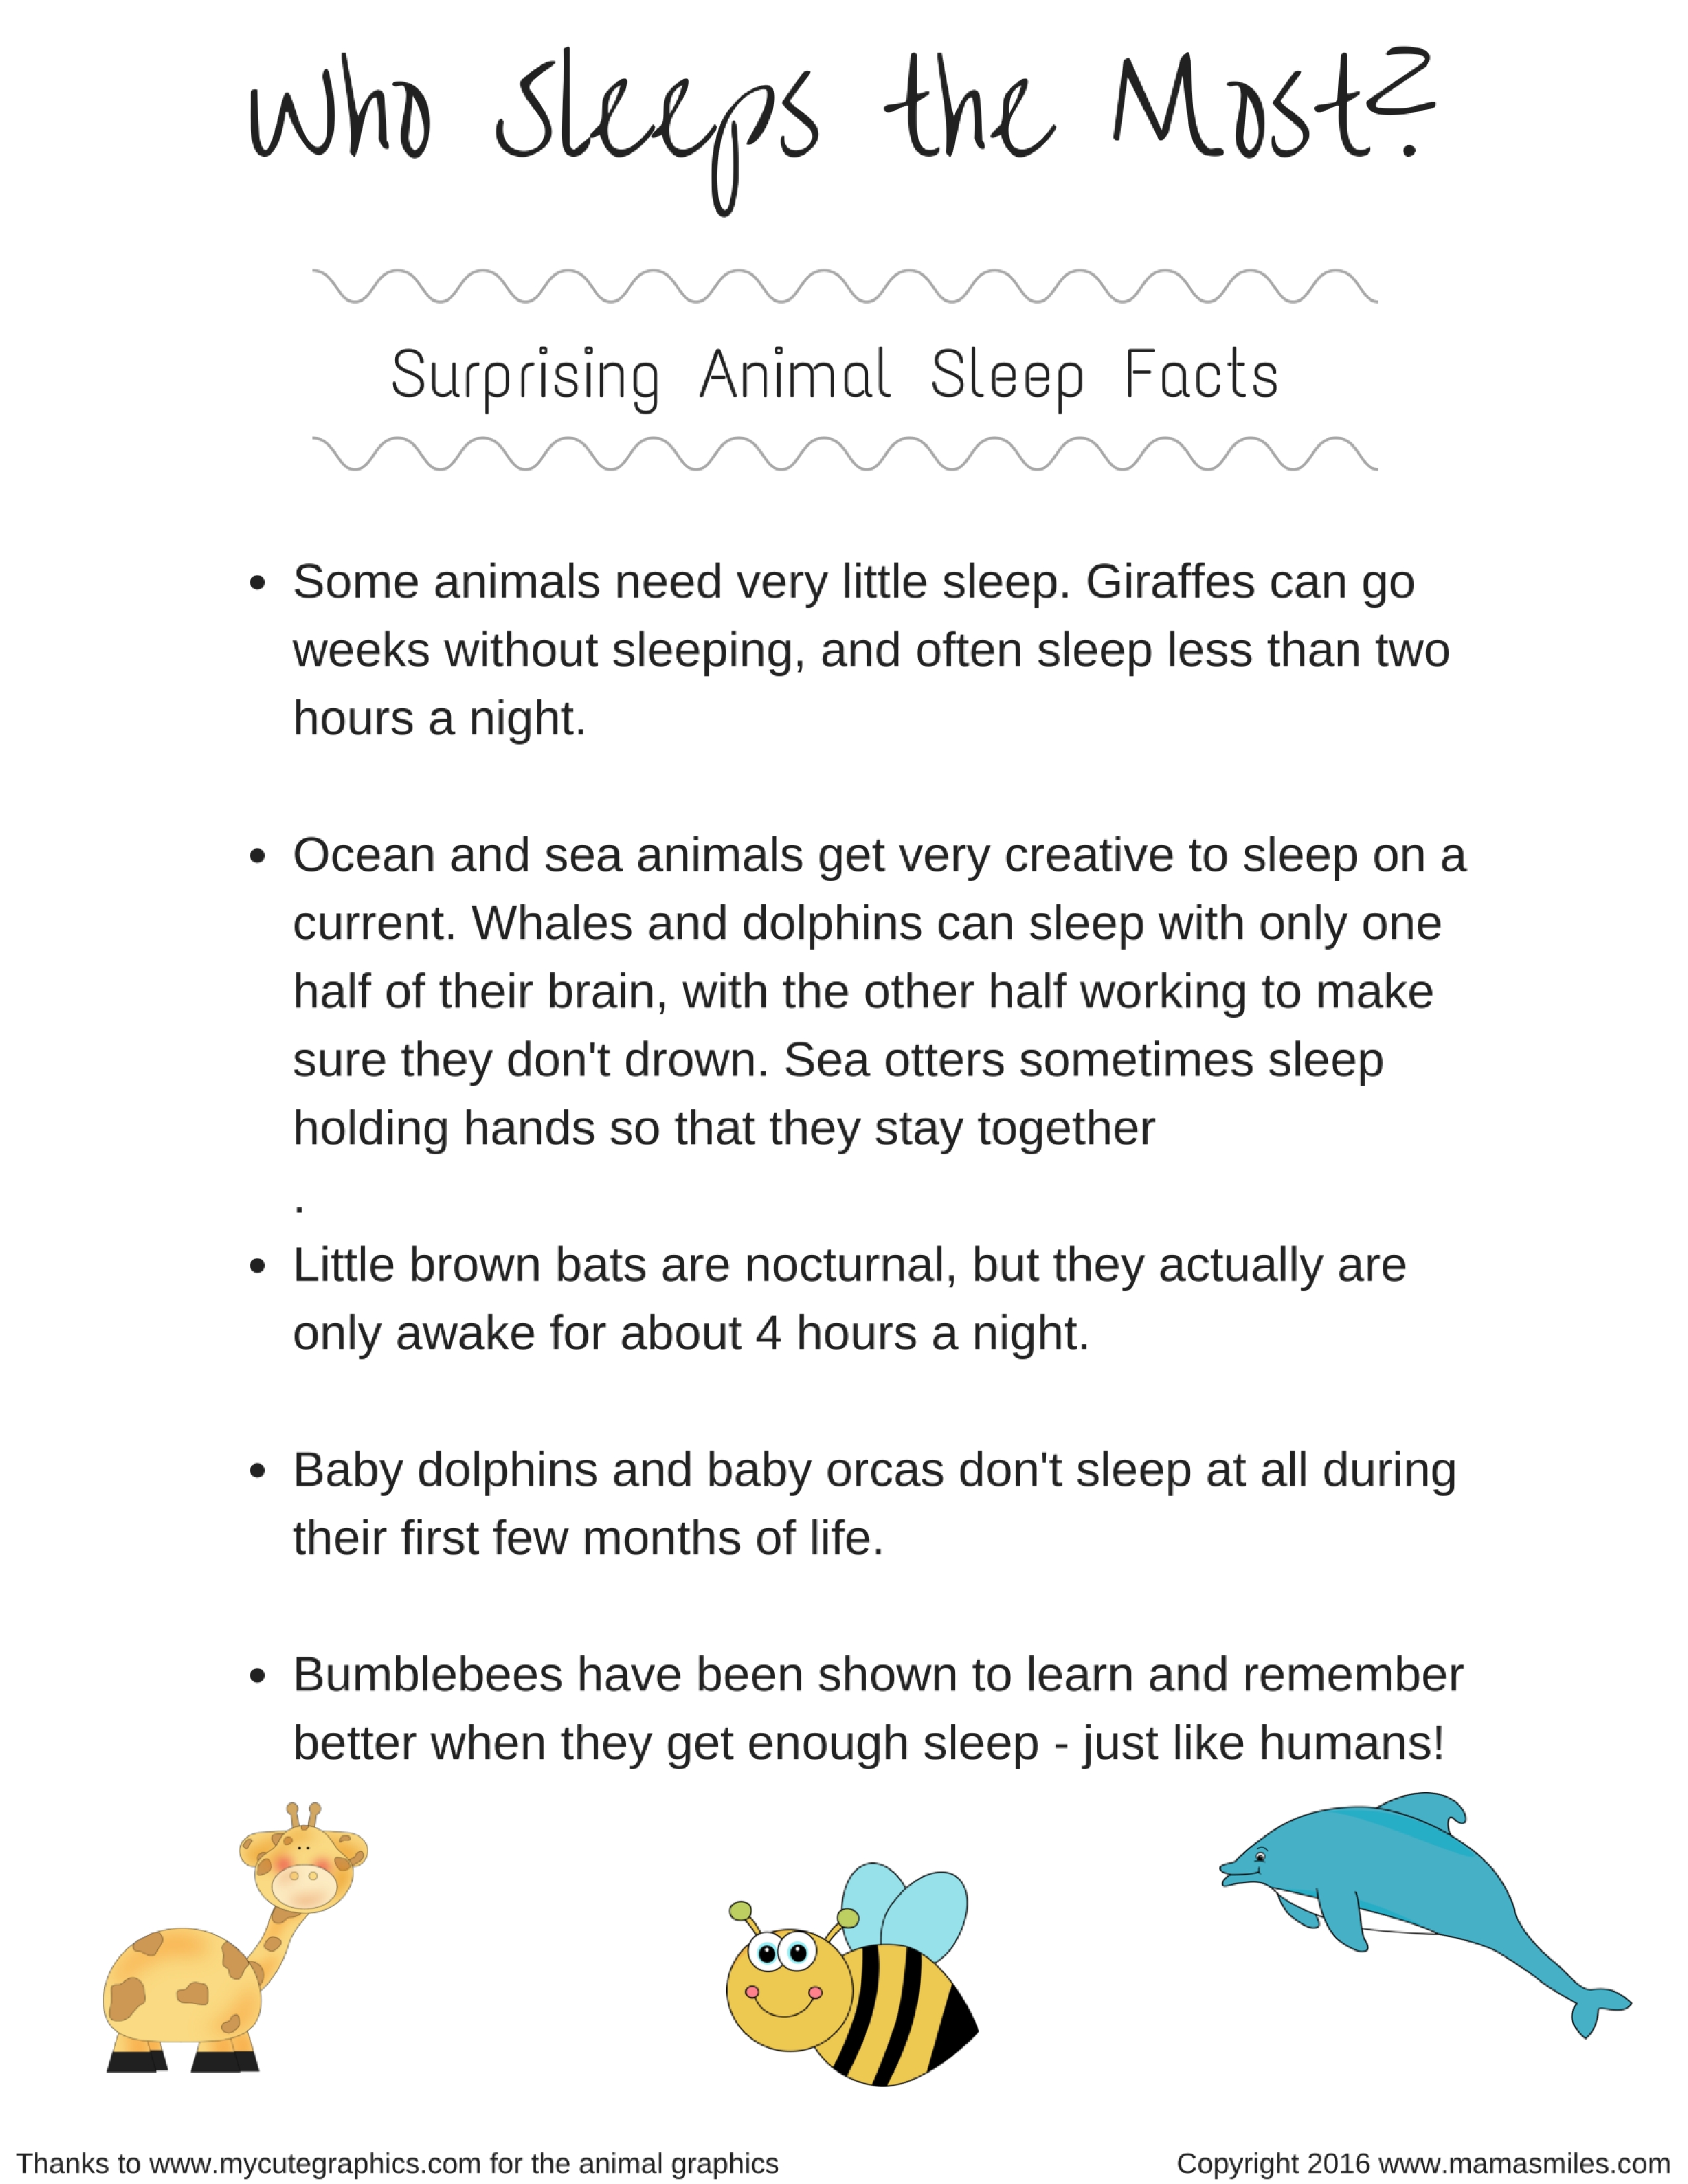 Surprising animal sleep facts for kids, and more night and sleep themed learning activities for children.